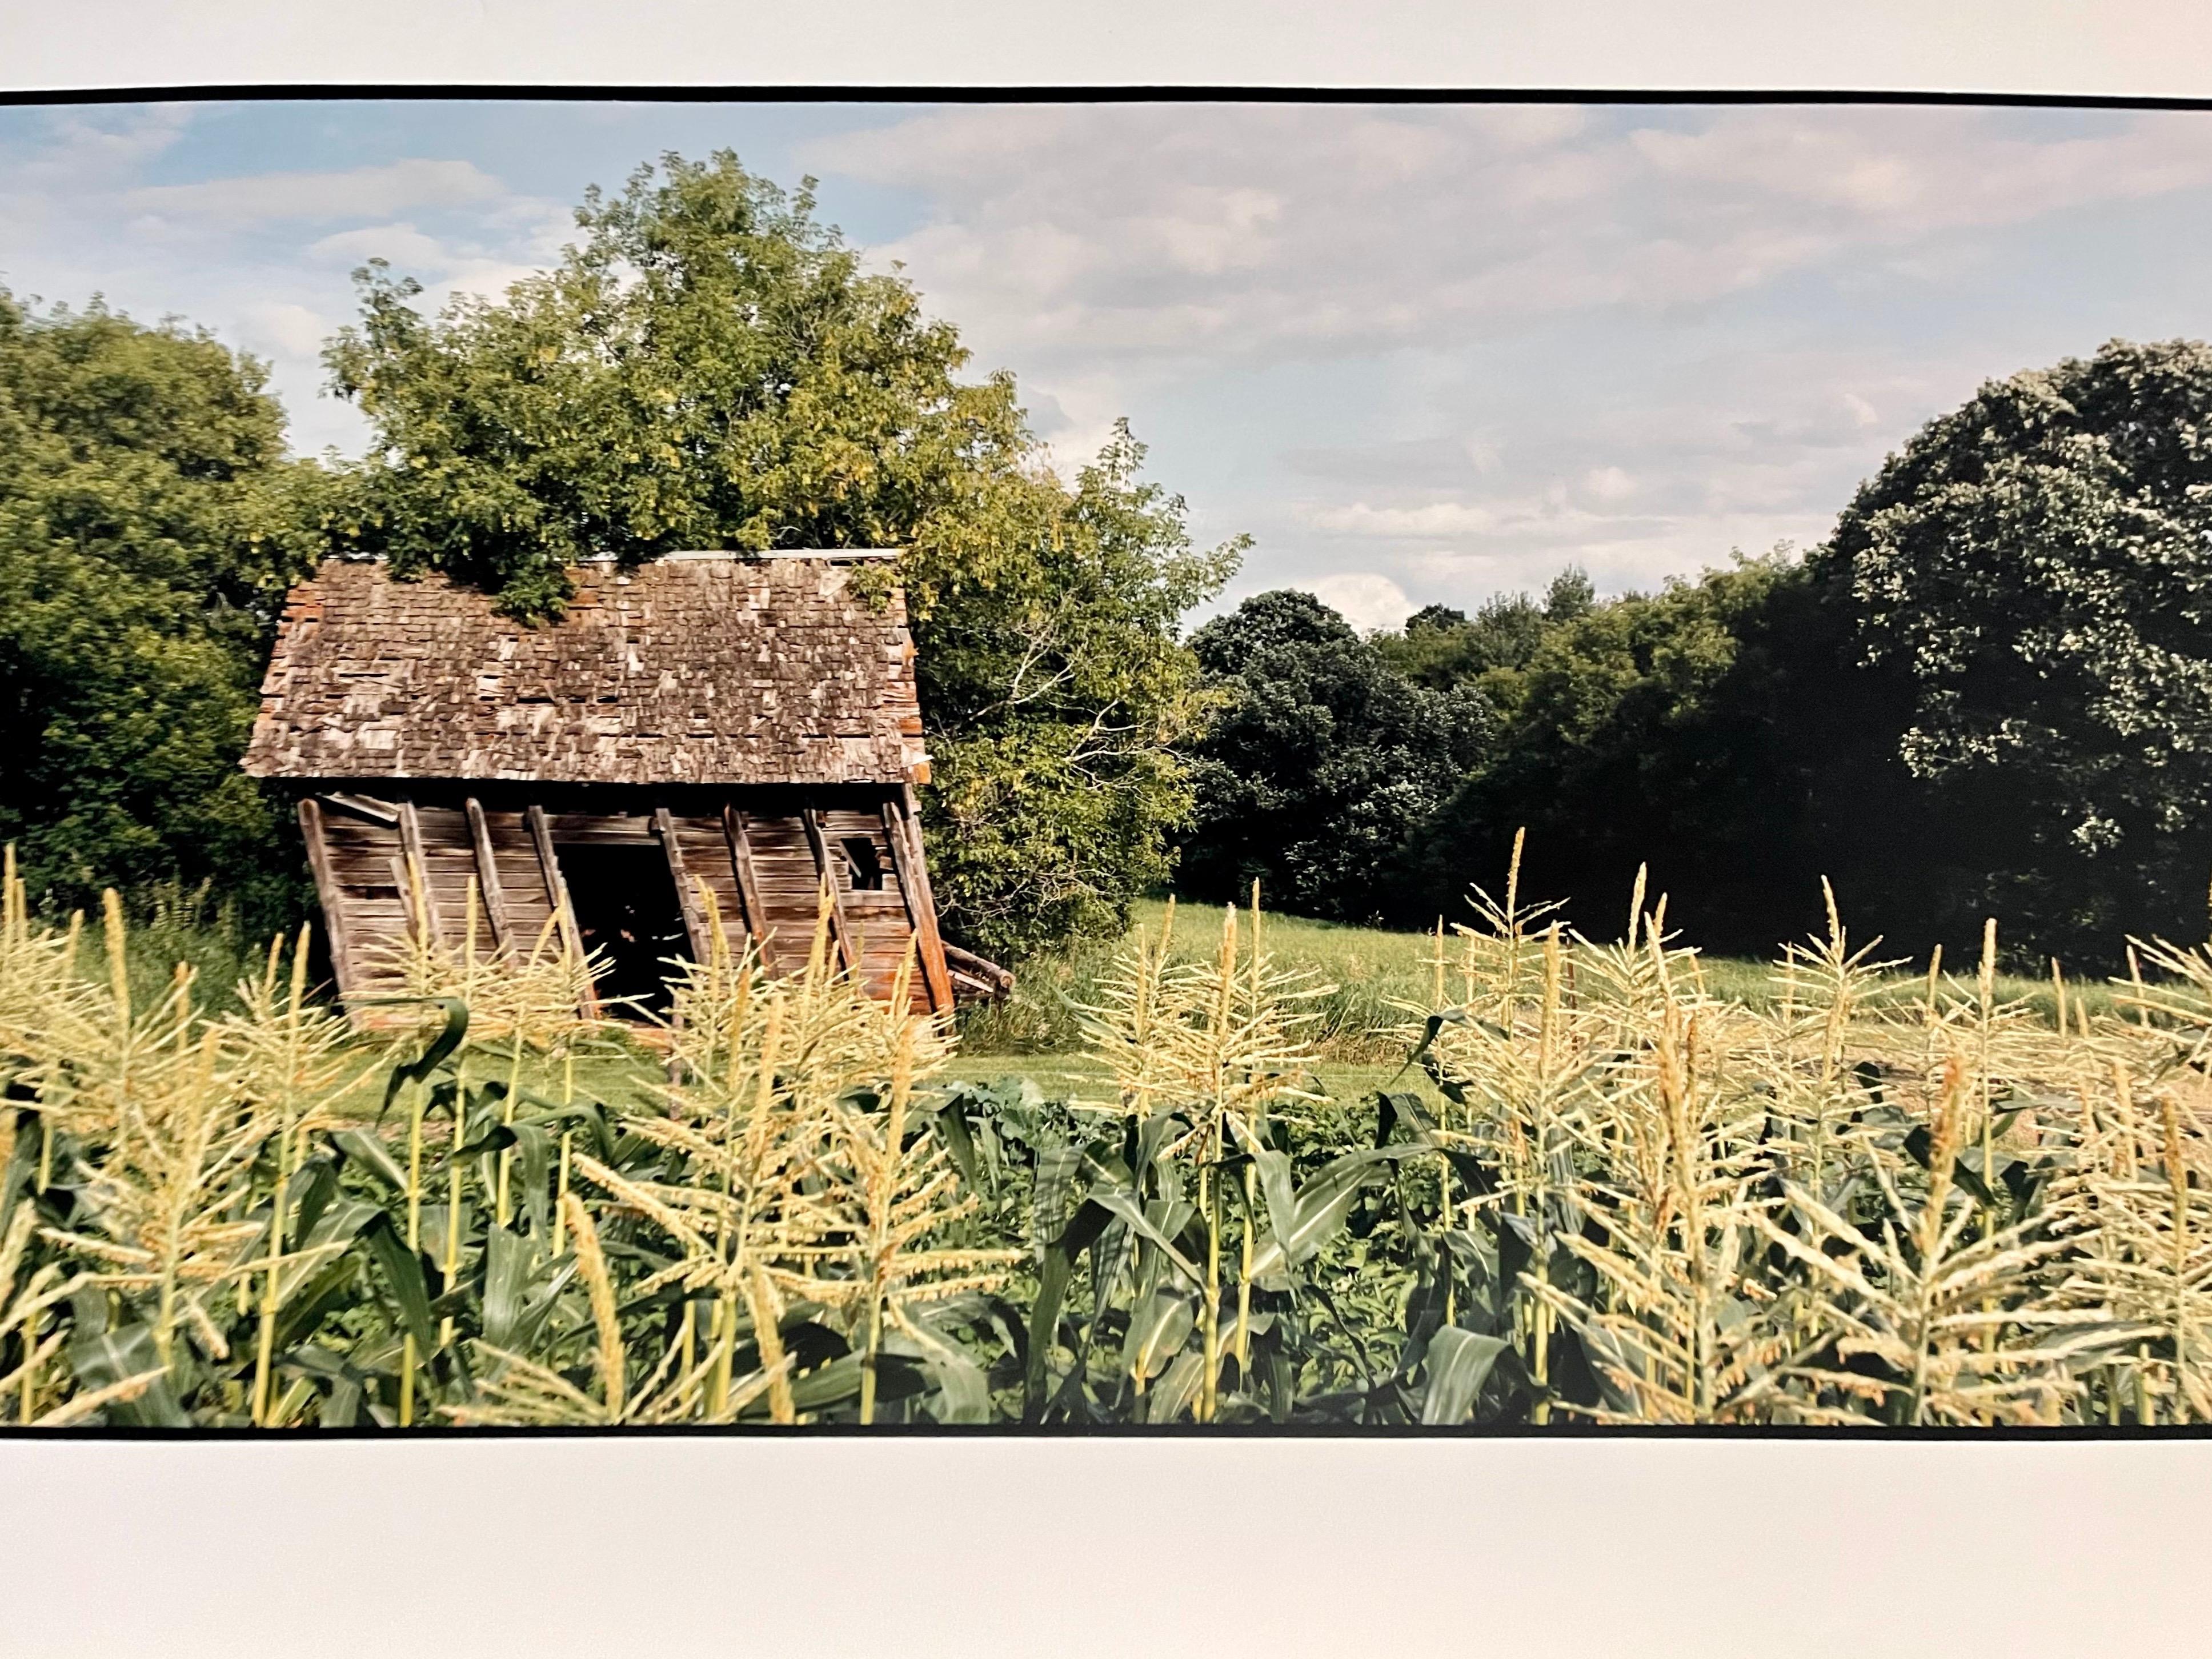 Farm house or tobacco shed, Summer
Fabulous American landscape photography of a rural landscape scene. 
from small hand signed edition of 20
Large Format Chromogenic print on Kodak Professional Paper
The sheets are approximately 30 X 56 inches
the